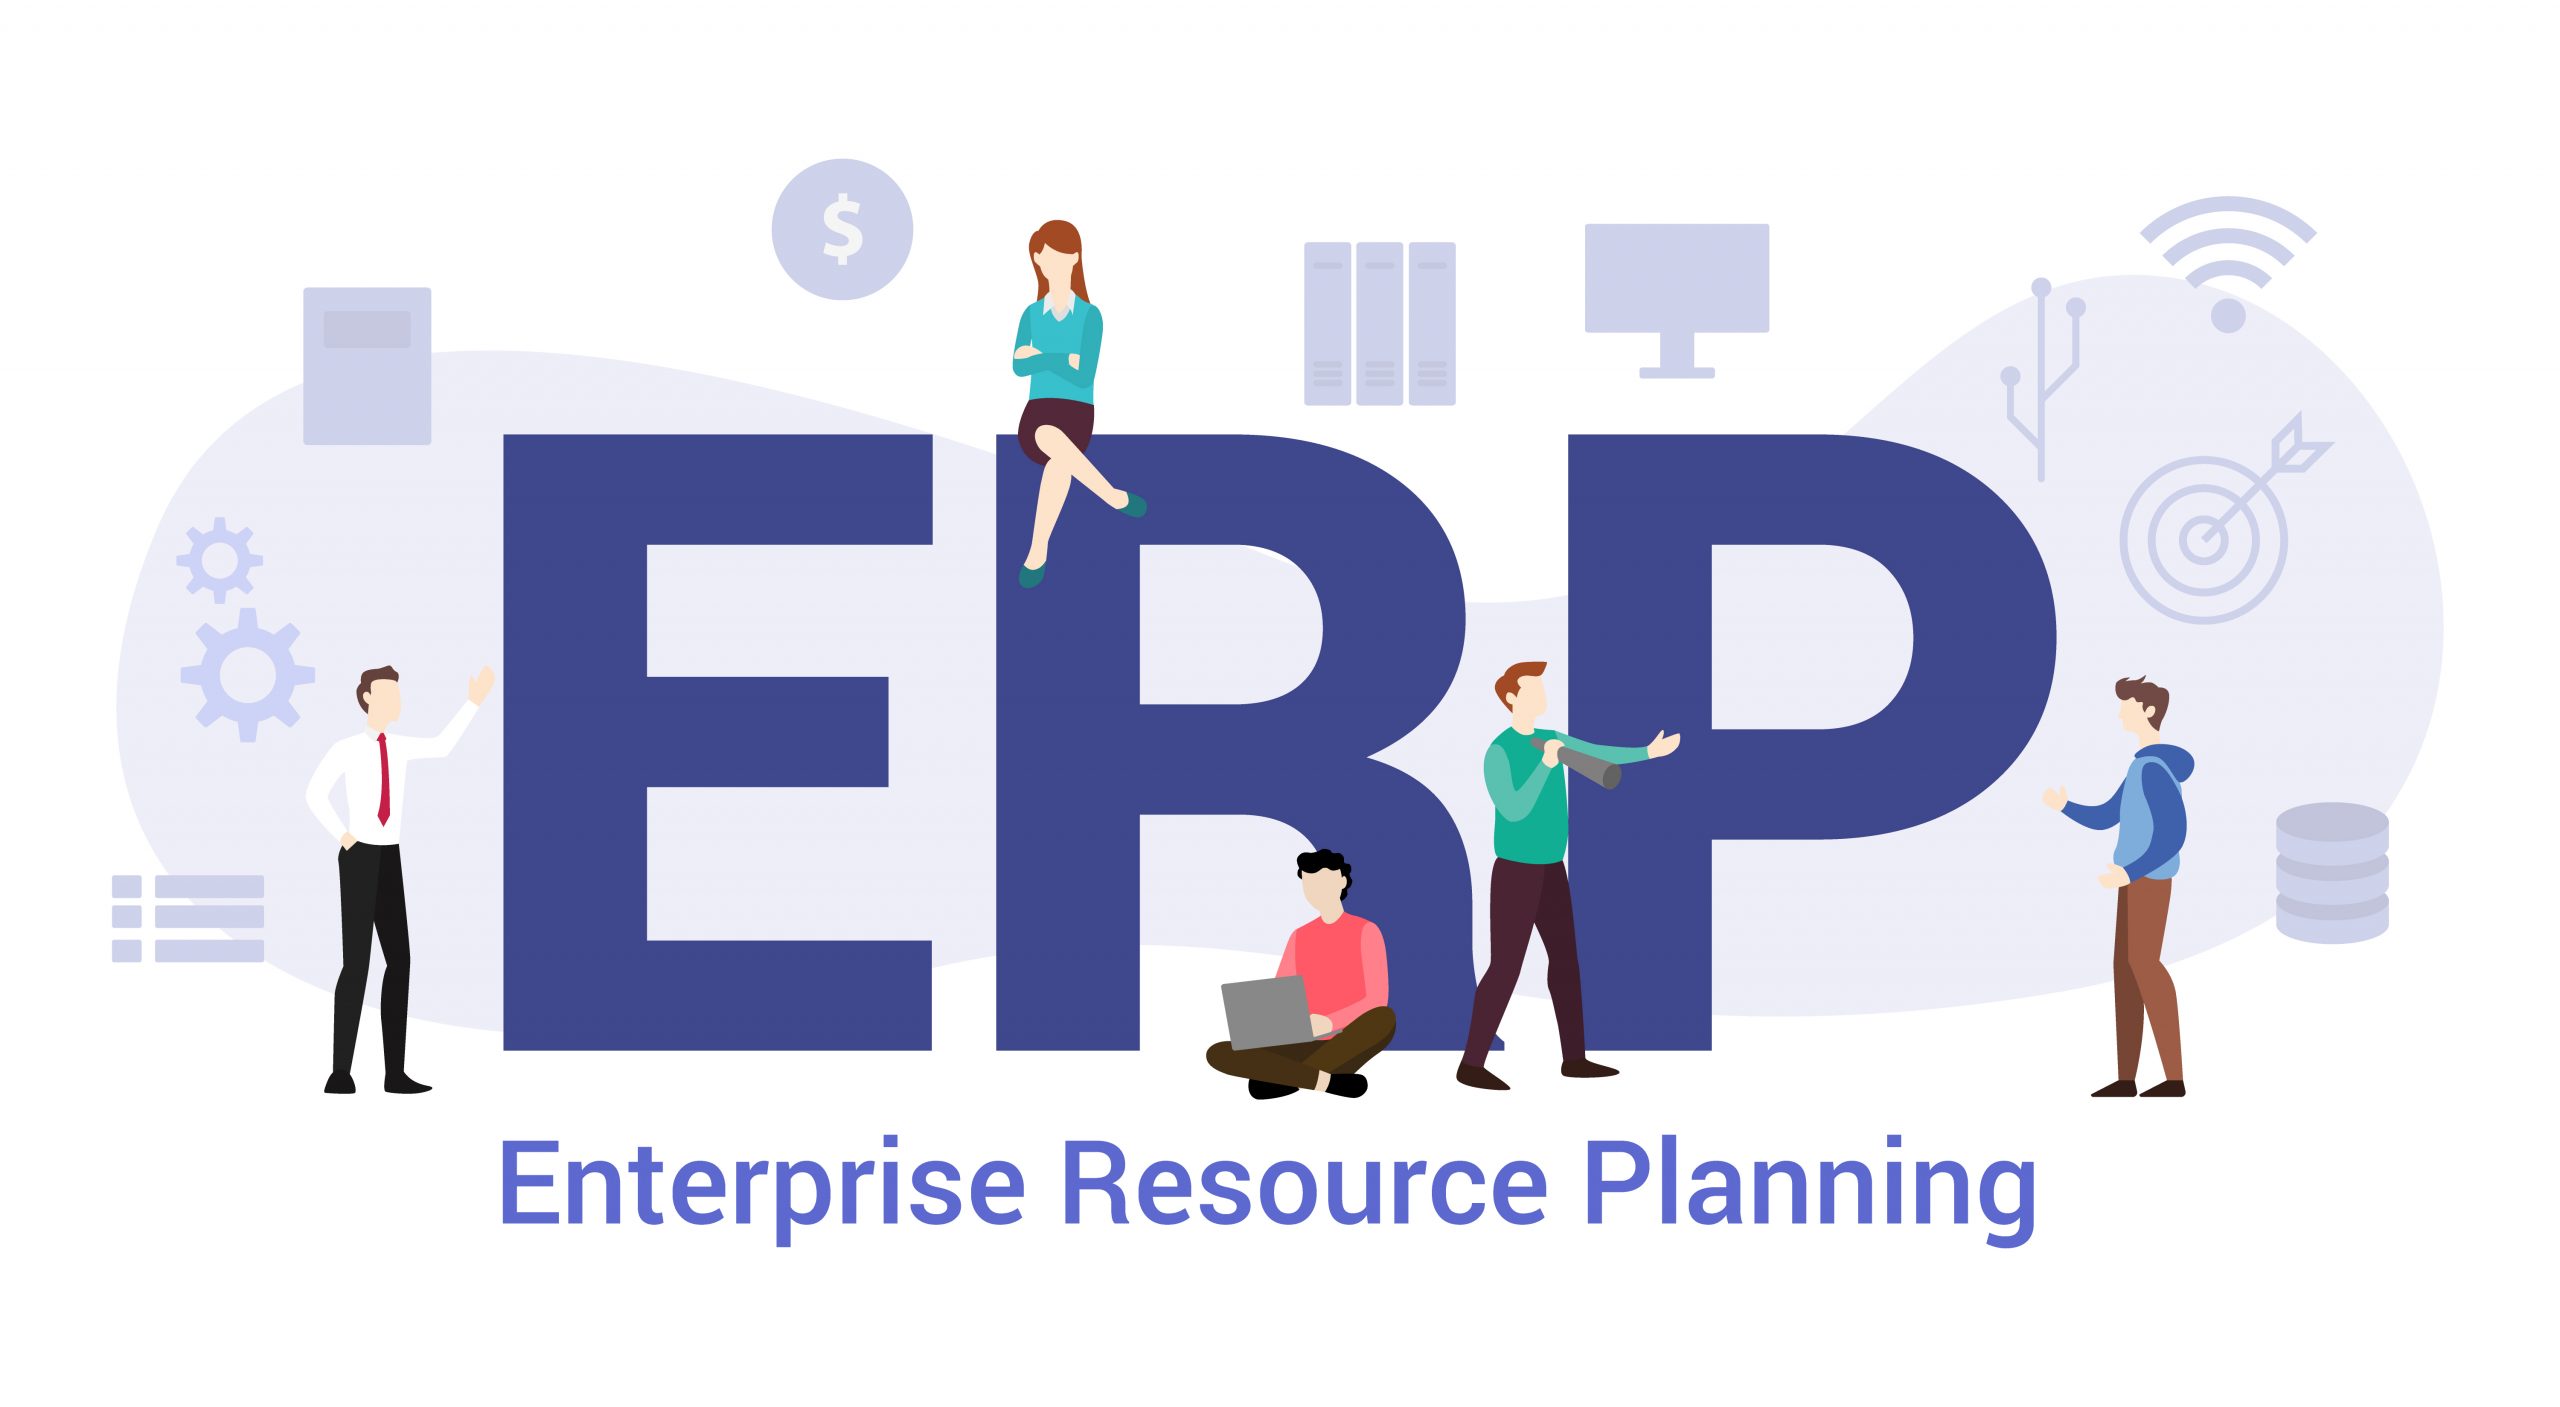 People are a critical resource for ERP implementation project success